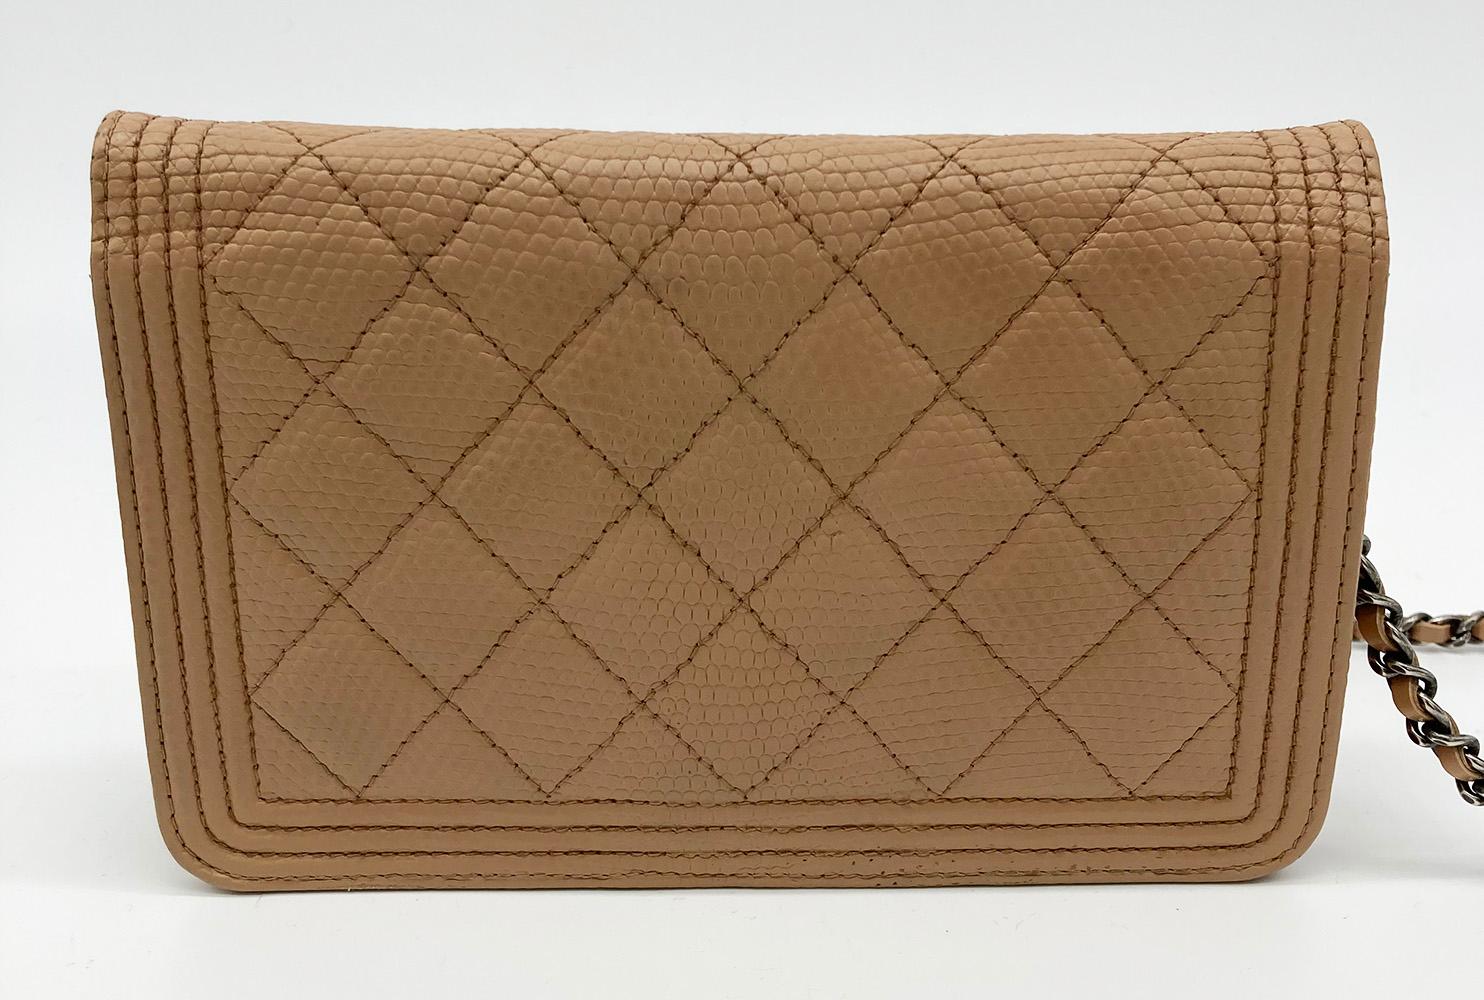 Chanel Tan Lizard Boy Wallet on Chain in excellent condition. Tan quilted lizard leather exterior trimmed with ruthenium hardware. Snap flap closure opens to a matching tan nylon interior with 6 credit card pockets, one slit pocket and one zipped